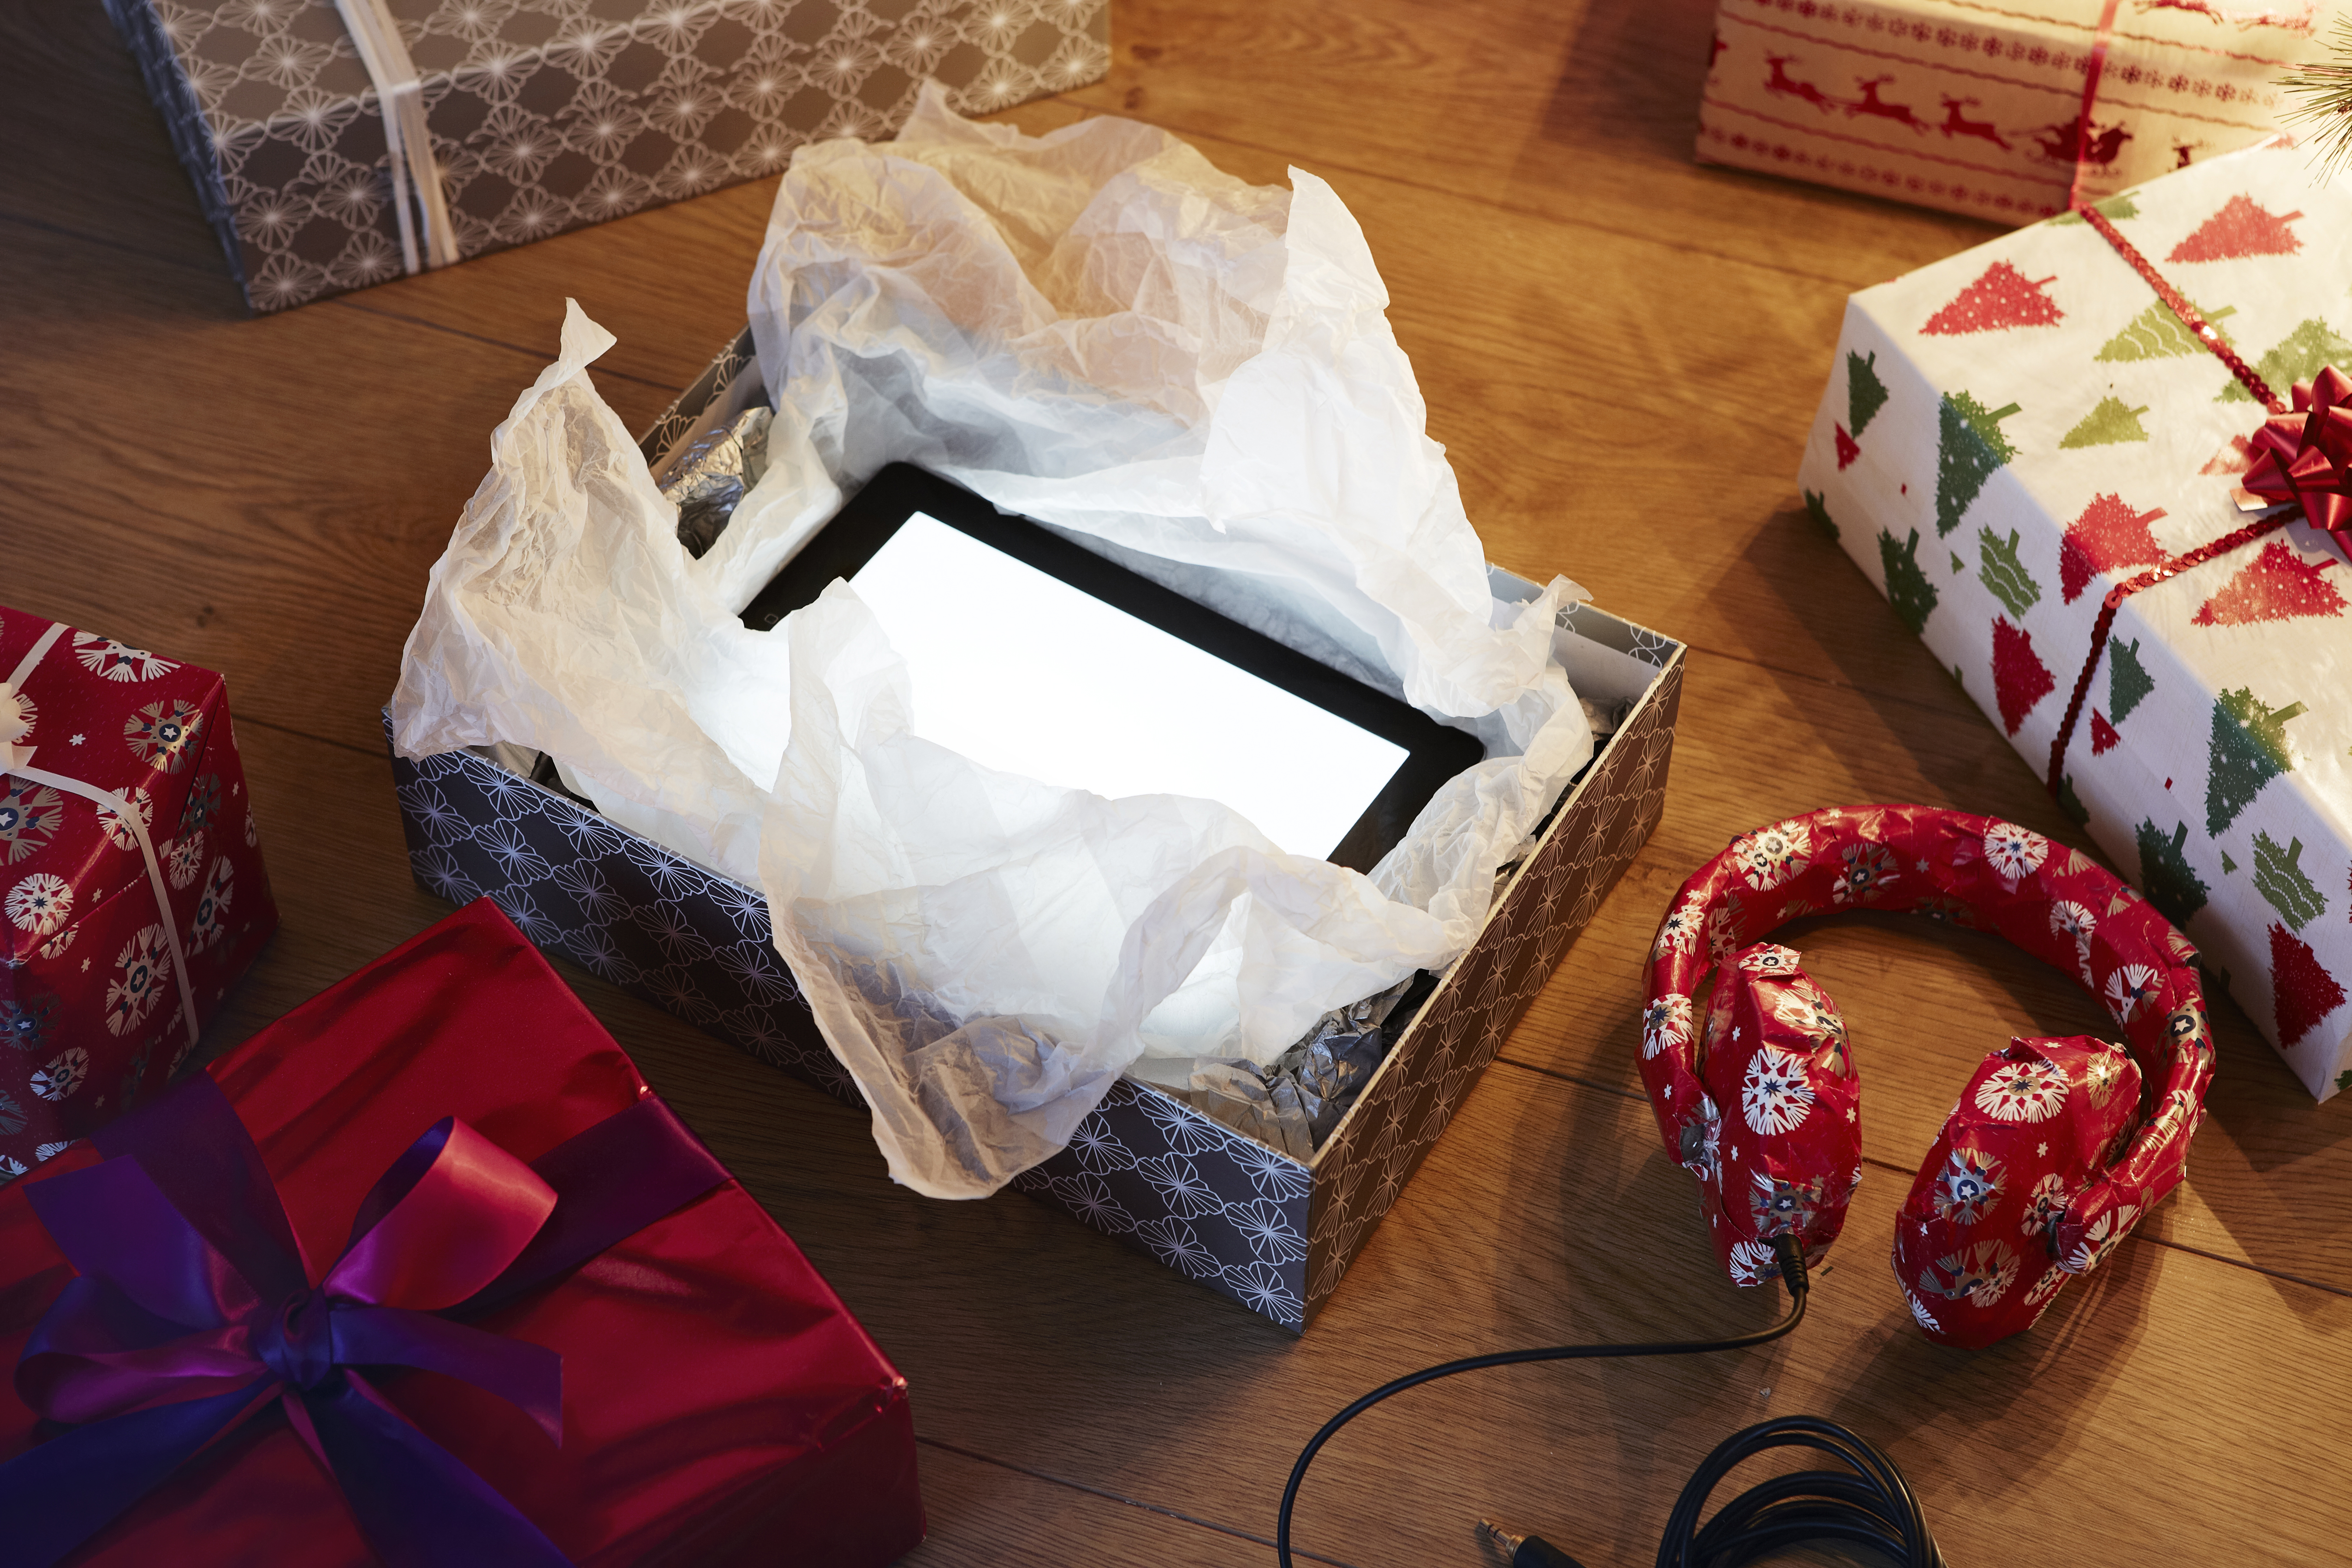 An unwrapped Christmas present revealing a tablet computer | Source: Getty Images